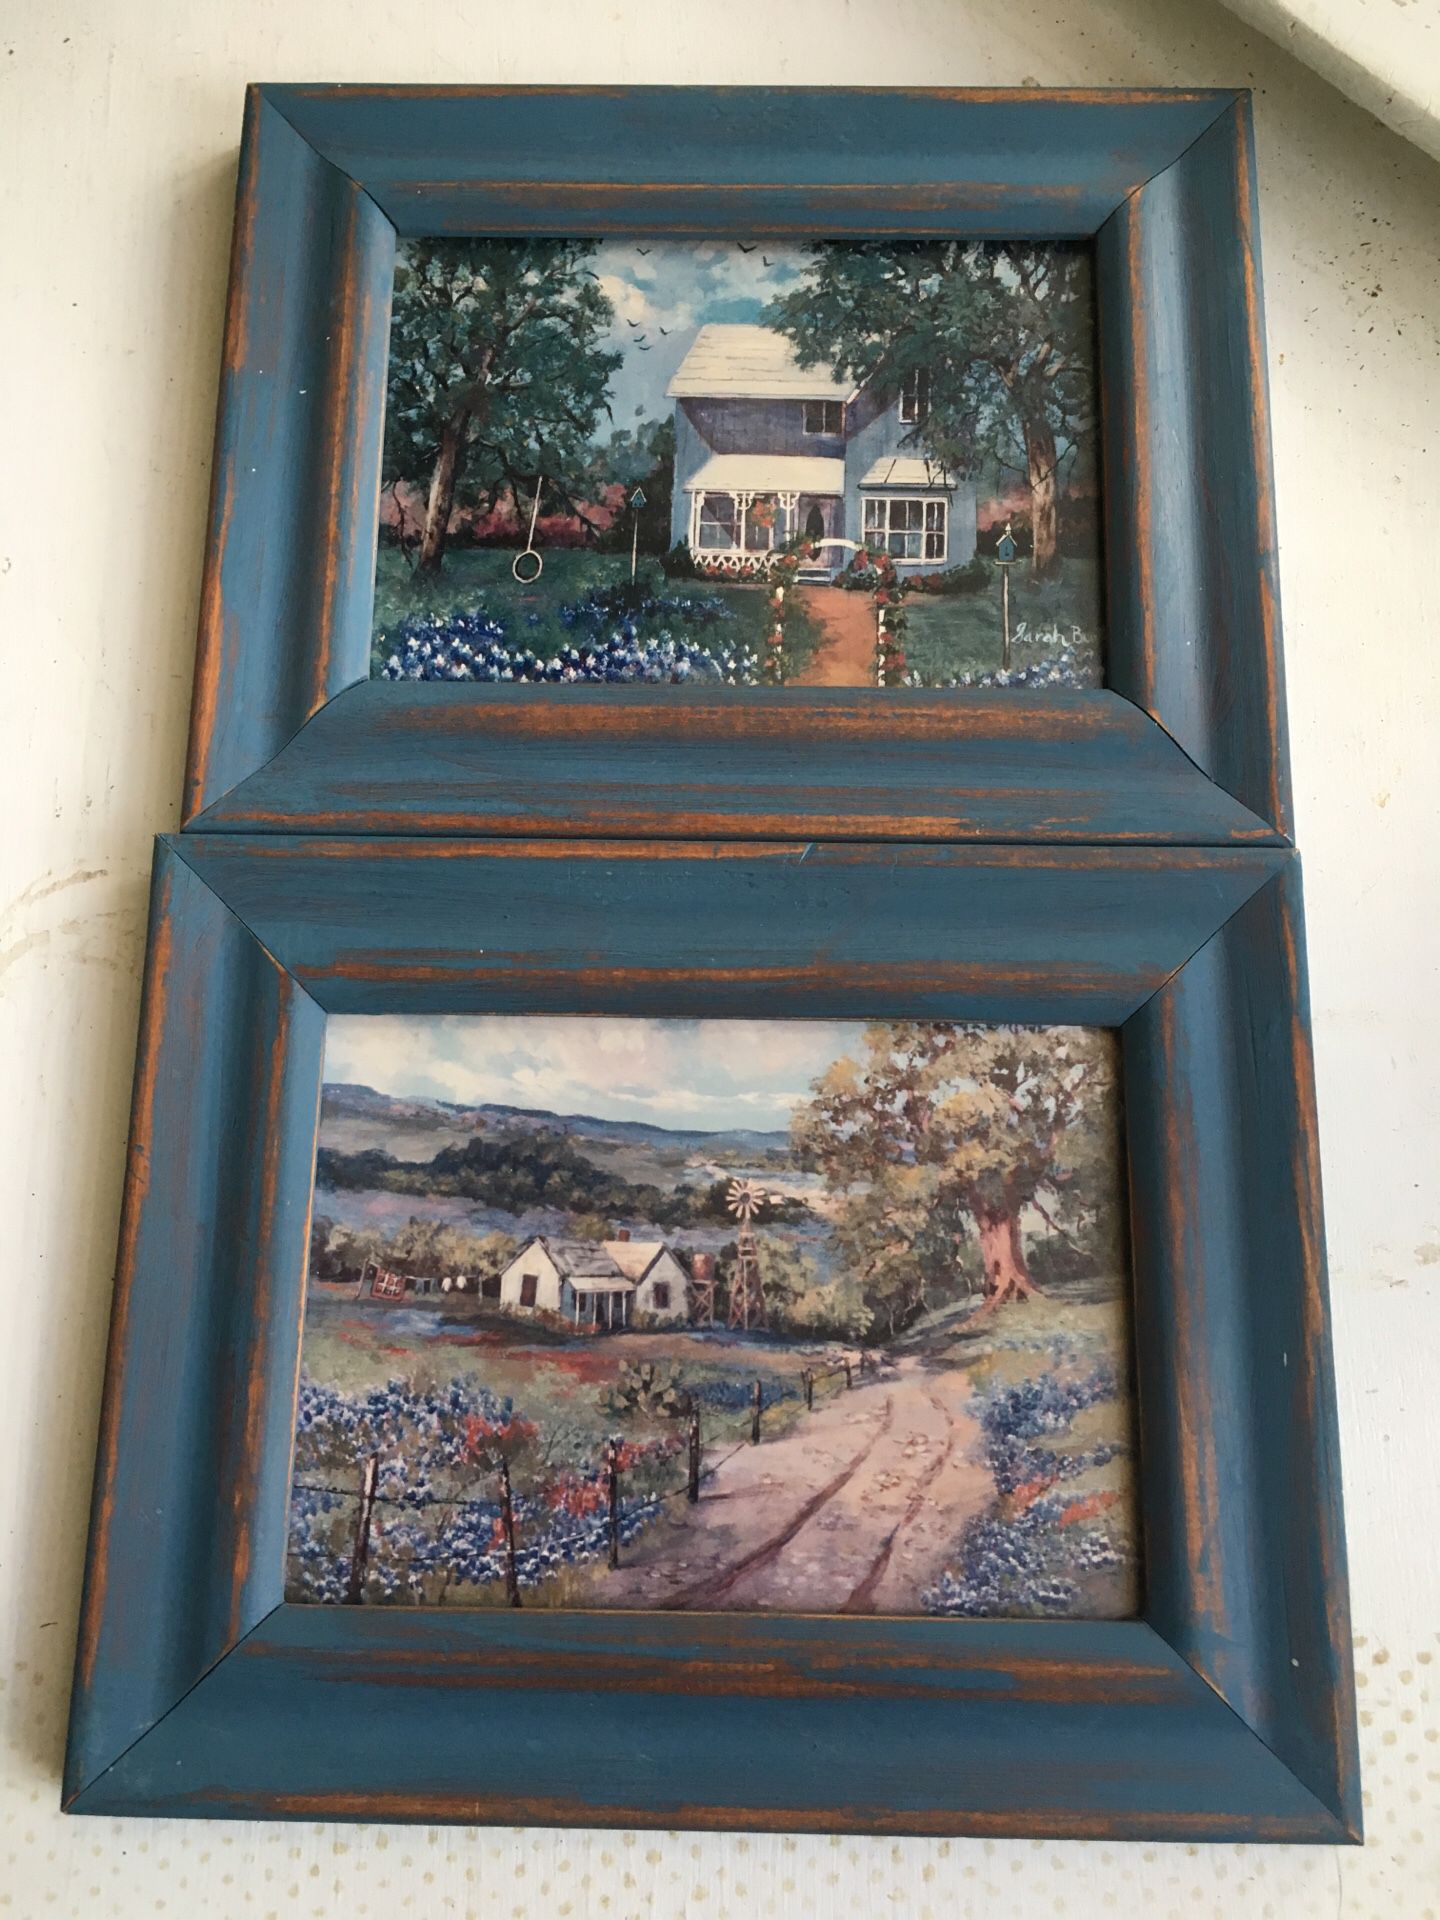 Framed photographs of a house and farm house with windmill and blue bonnets non glare glass